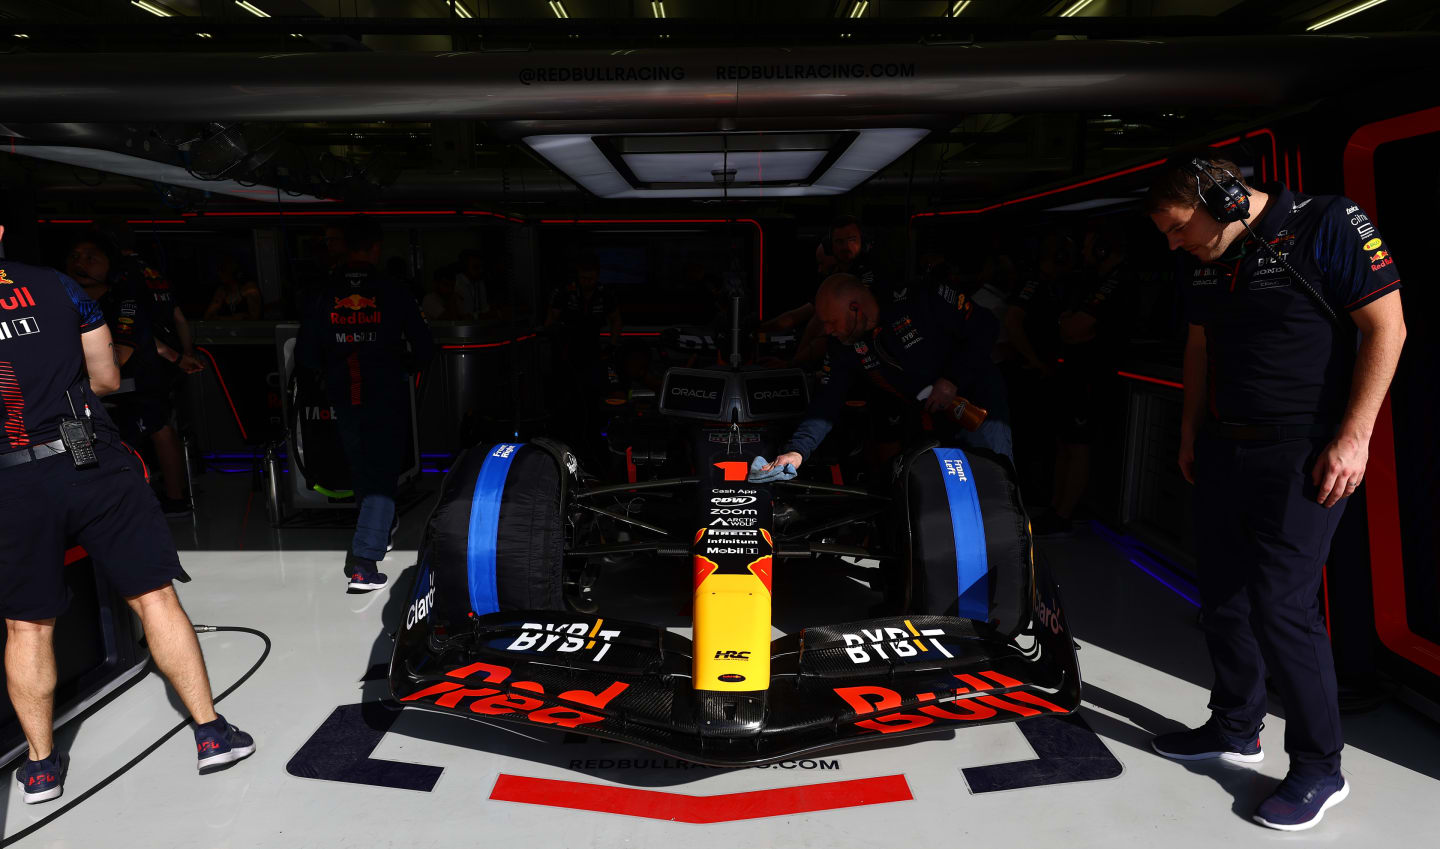 BAHRAIN, BAHRAIN - MARCH 03: A view of Max Verstappen of the Netherlands and Oracle Red Bull Racing in the garage during practice ahead of the F1 Grand Prix of Bahrain at Bahrain International Circuit on March 03, 2023 in Bahrain, Bahrain. (Photo by Mark Thompson/Getty Images)